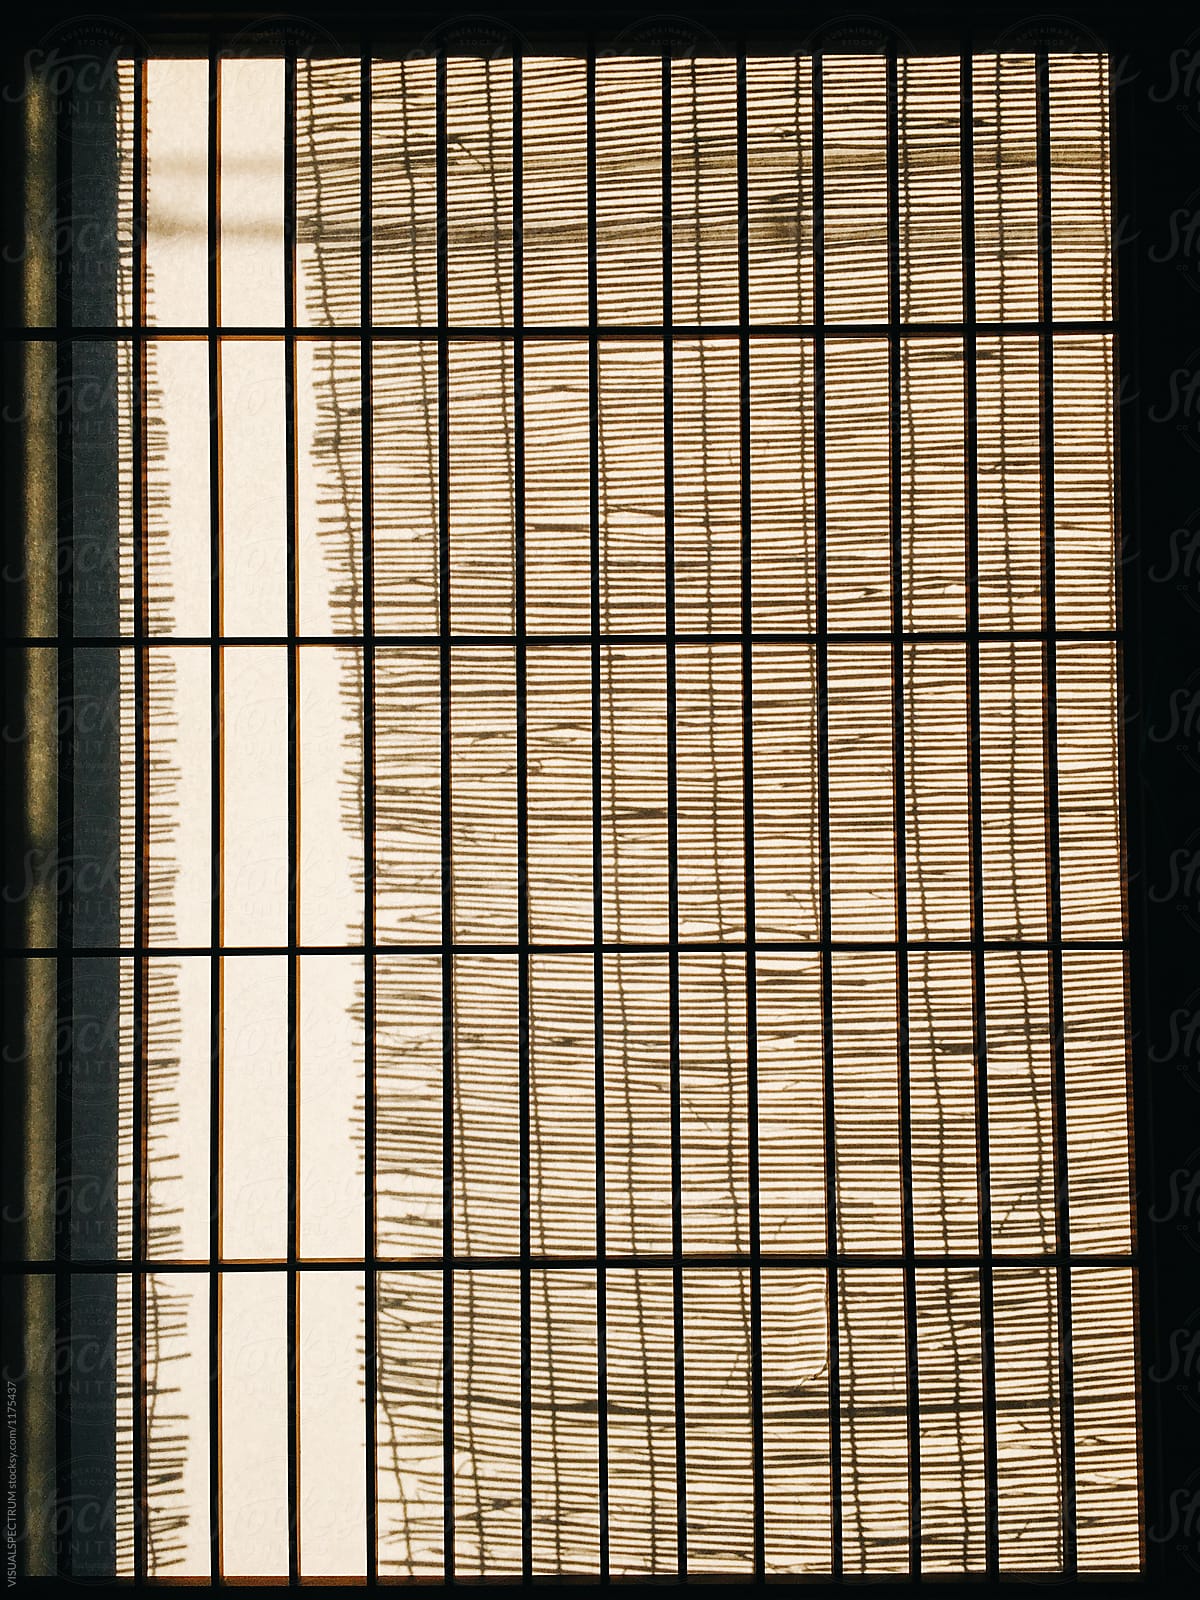 Shadow of Bamboo Curtain on Japanese Paper Window